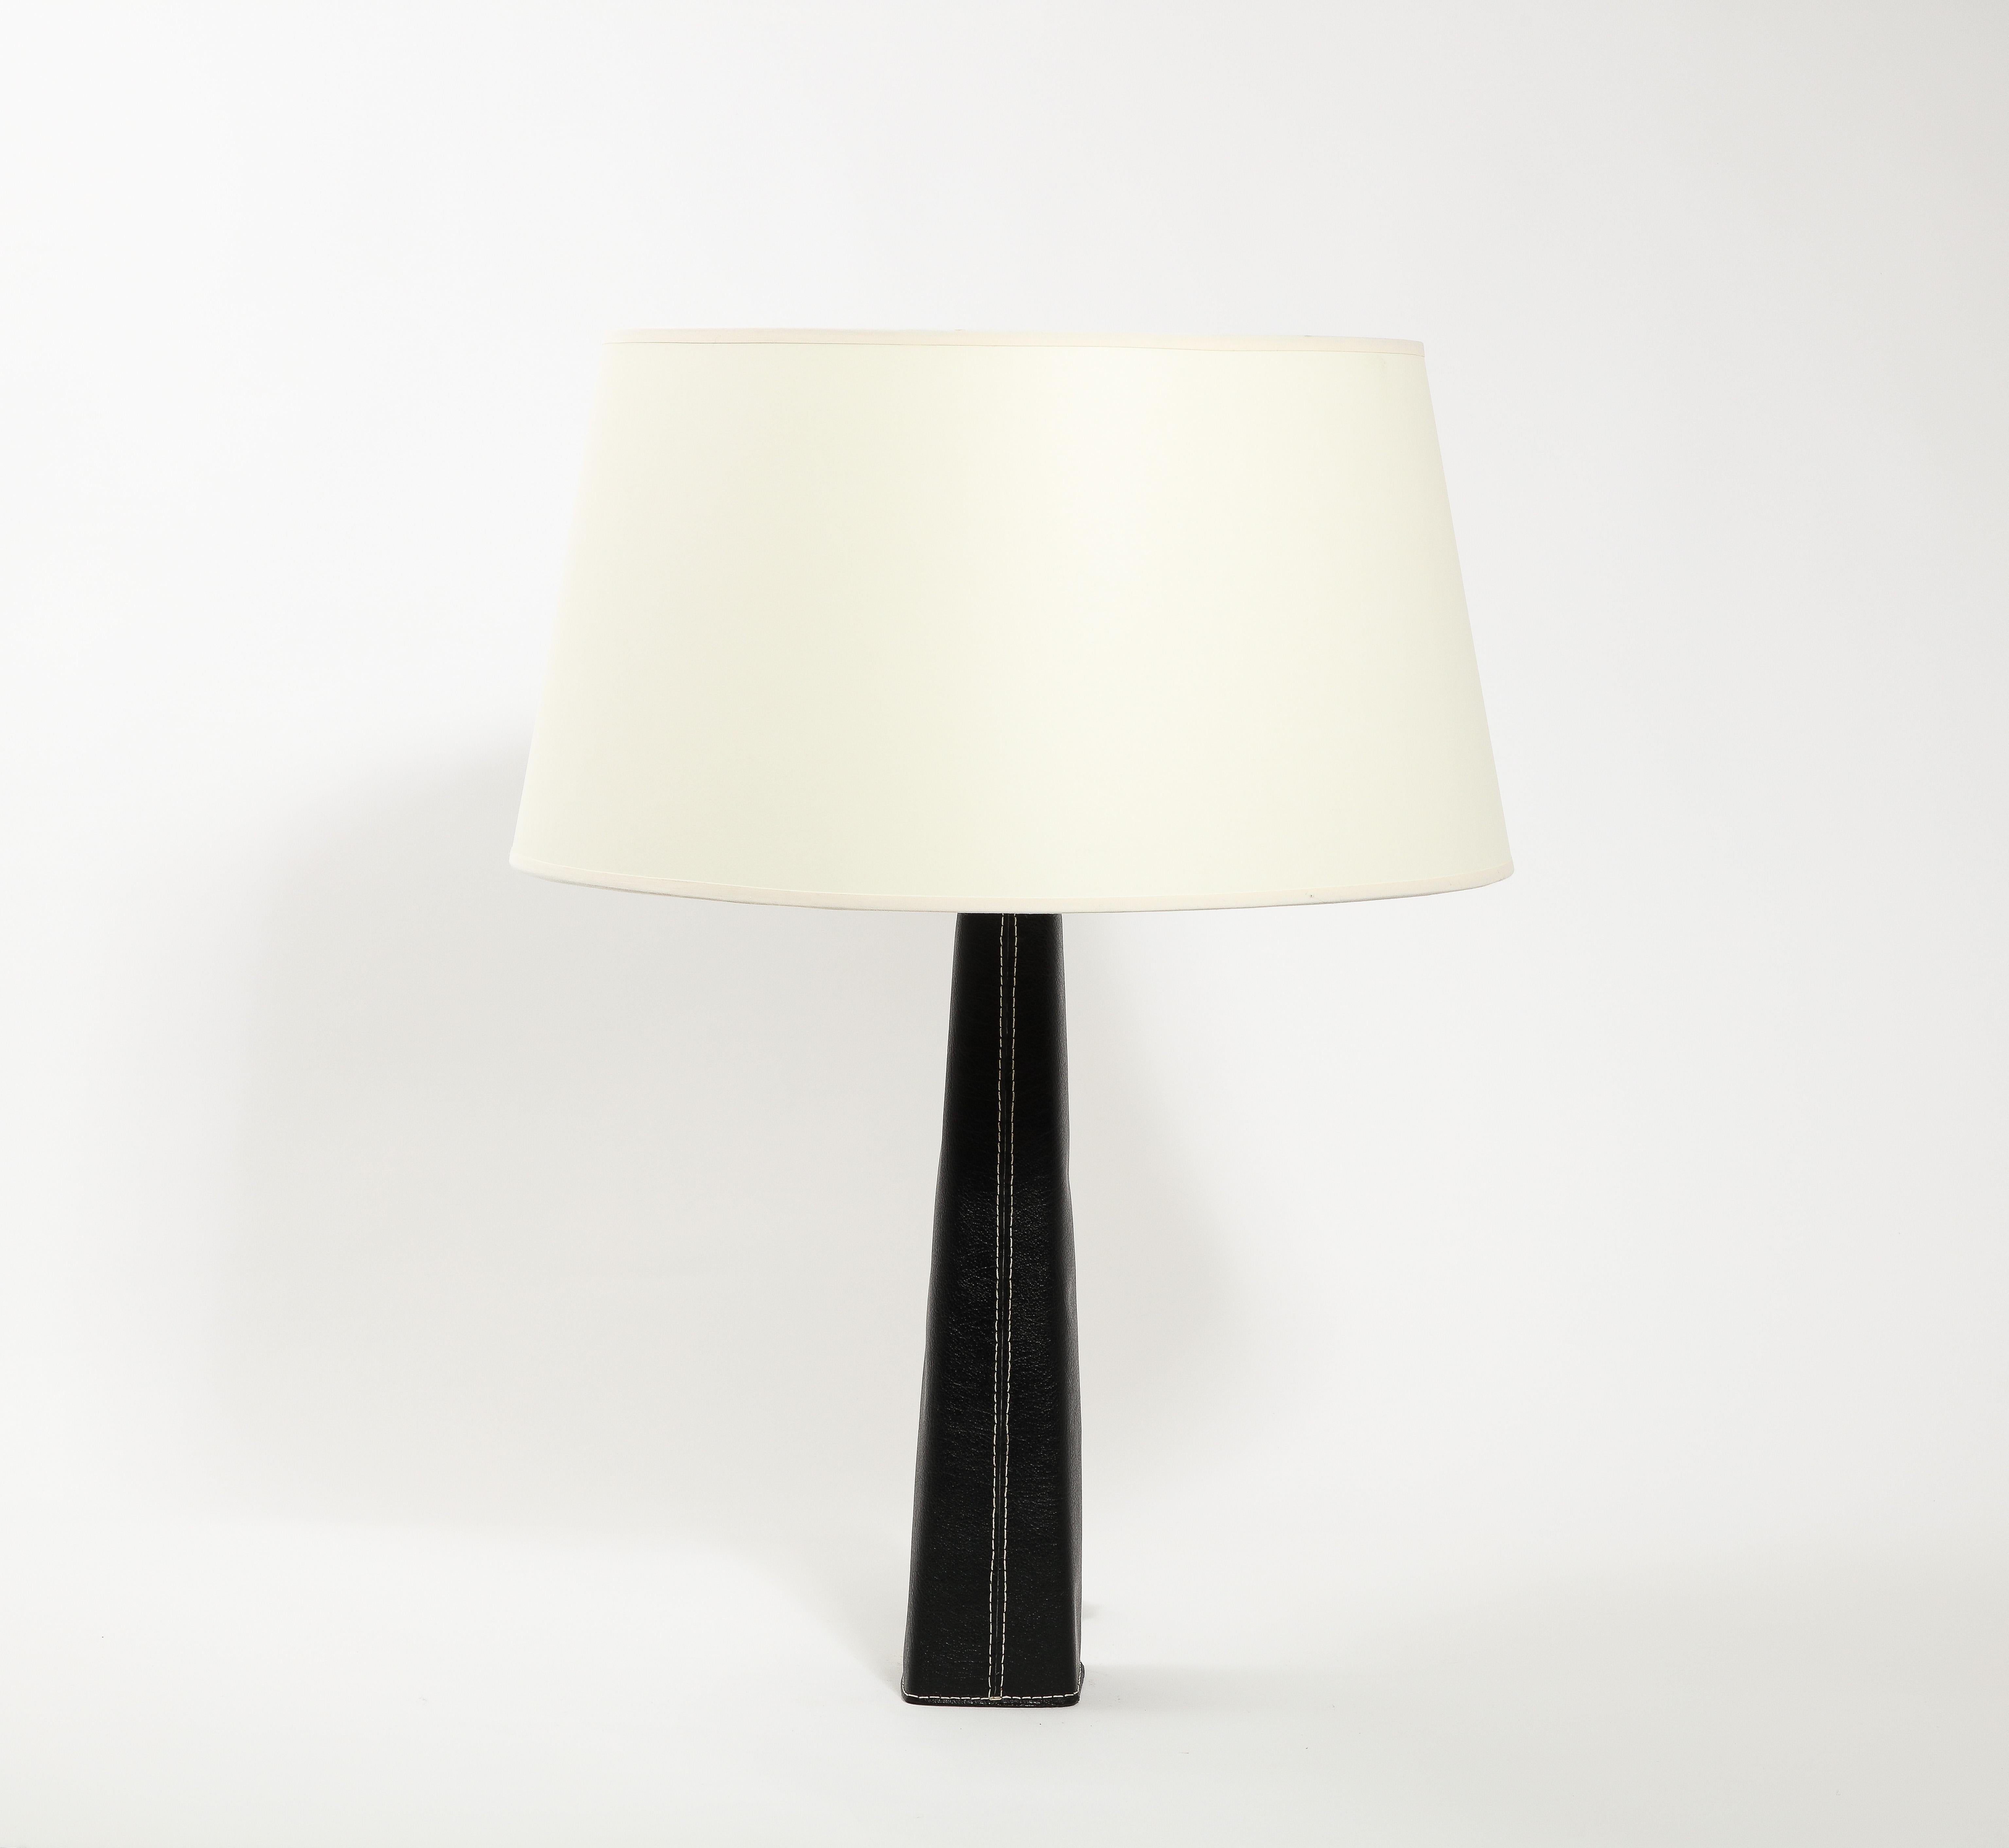 Learthe Covered Table Lamp by Metalarte, Spain 1970's For Sale 5